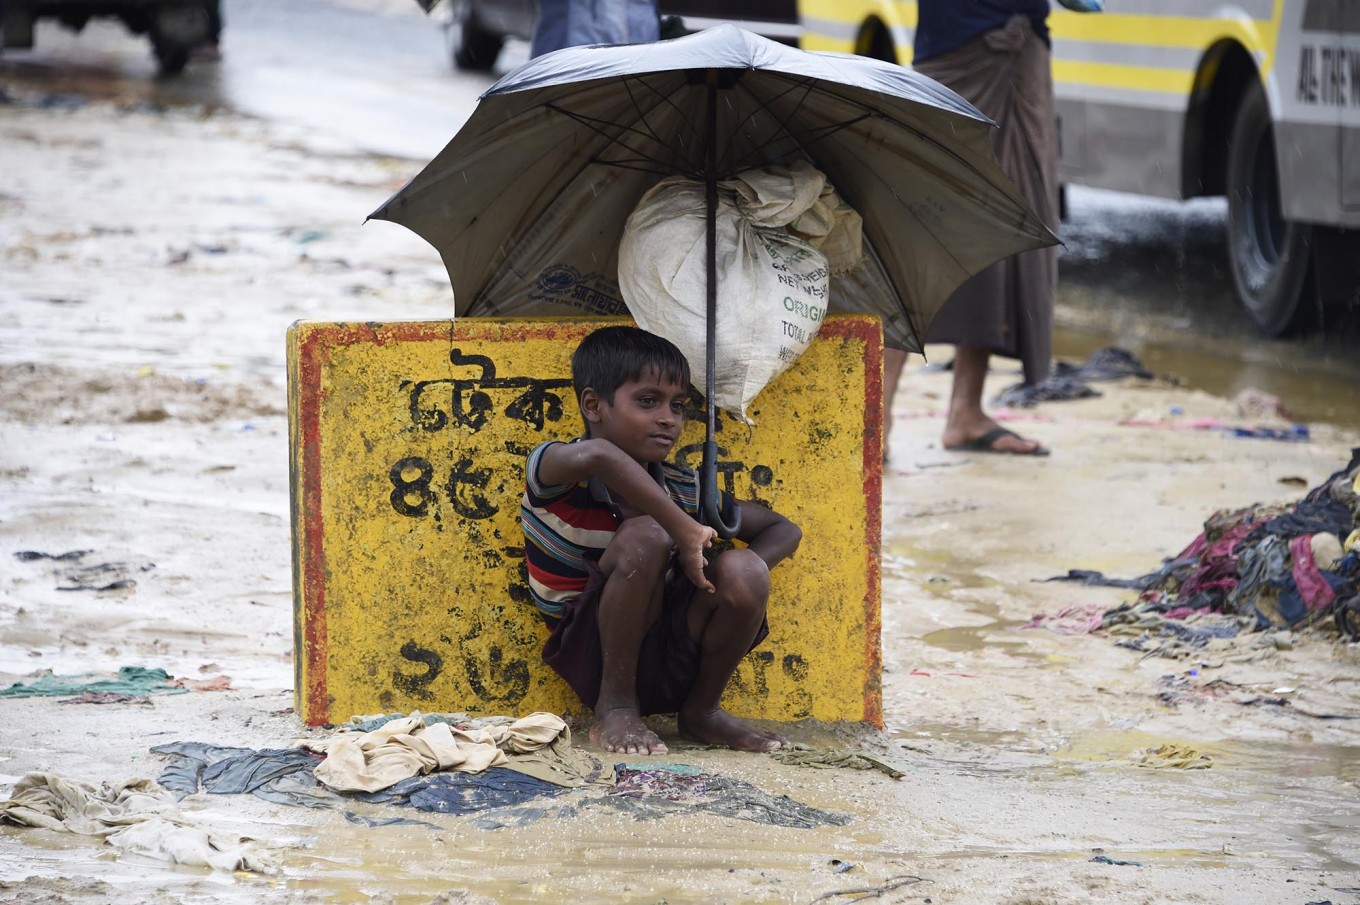 A young Rohingya refugee shelters from the rain with an umbrella while sitting at Kutupalong refugee camp in the Bangladeshi locality of Ukhia on September 19, 2017. (AFP/Dominique Faget)